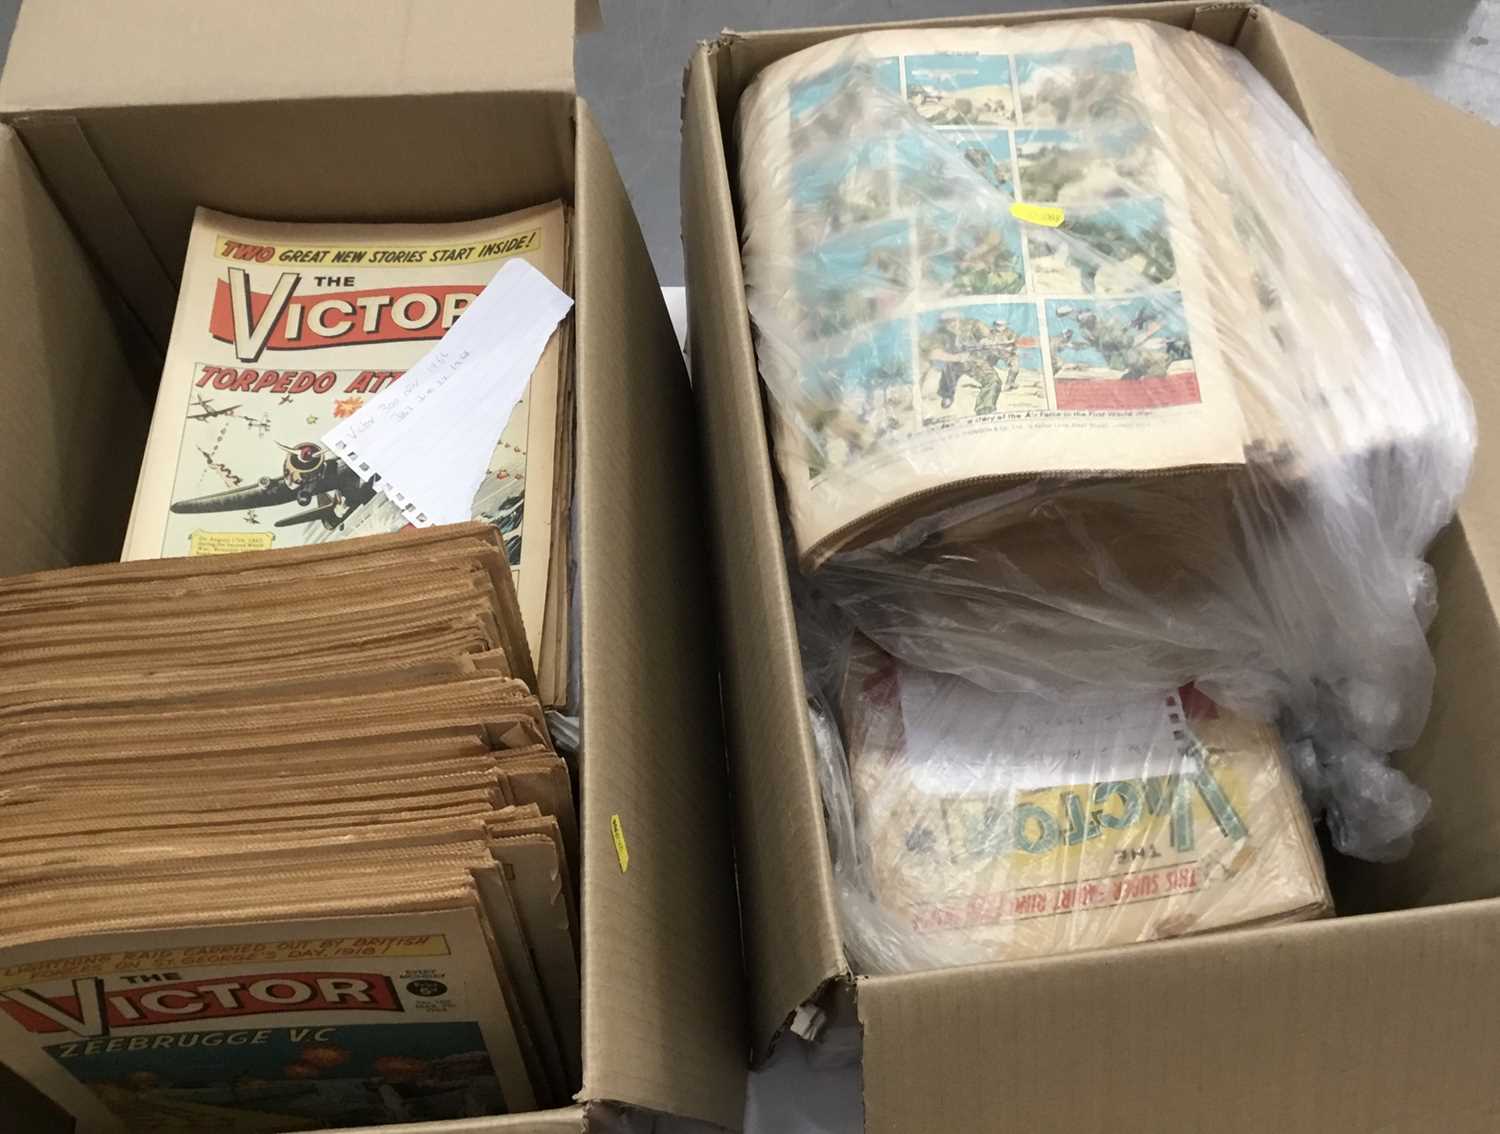 Over 300 issues of The Victor comic, from issue 1 1961 to 383 in 1968, together with other 1960s com - Image 2 of 2